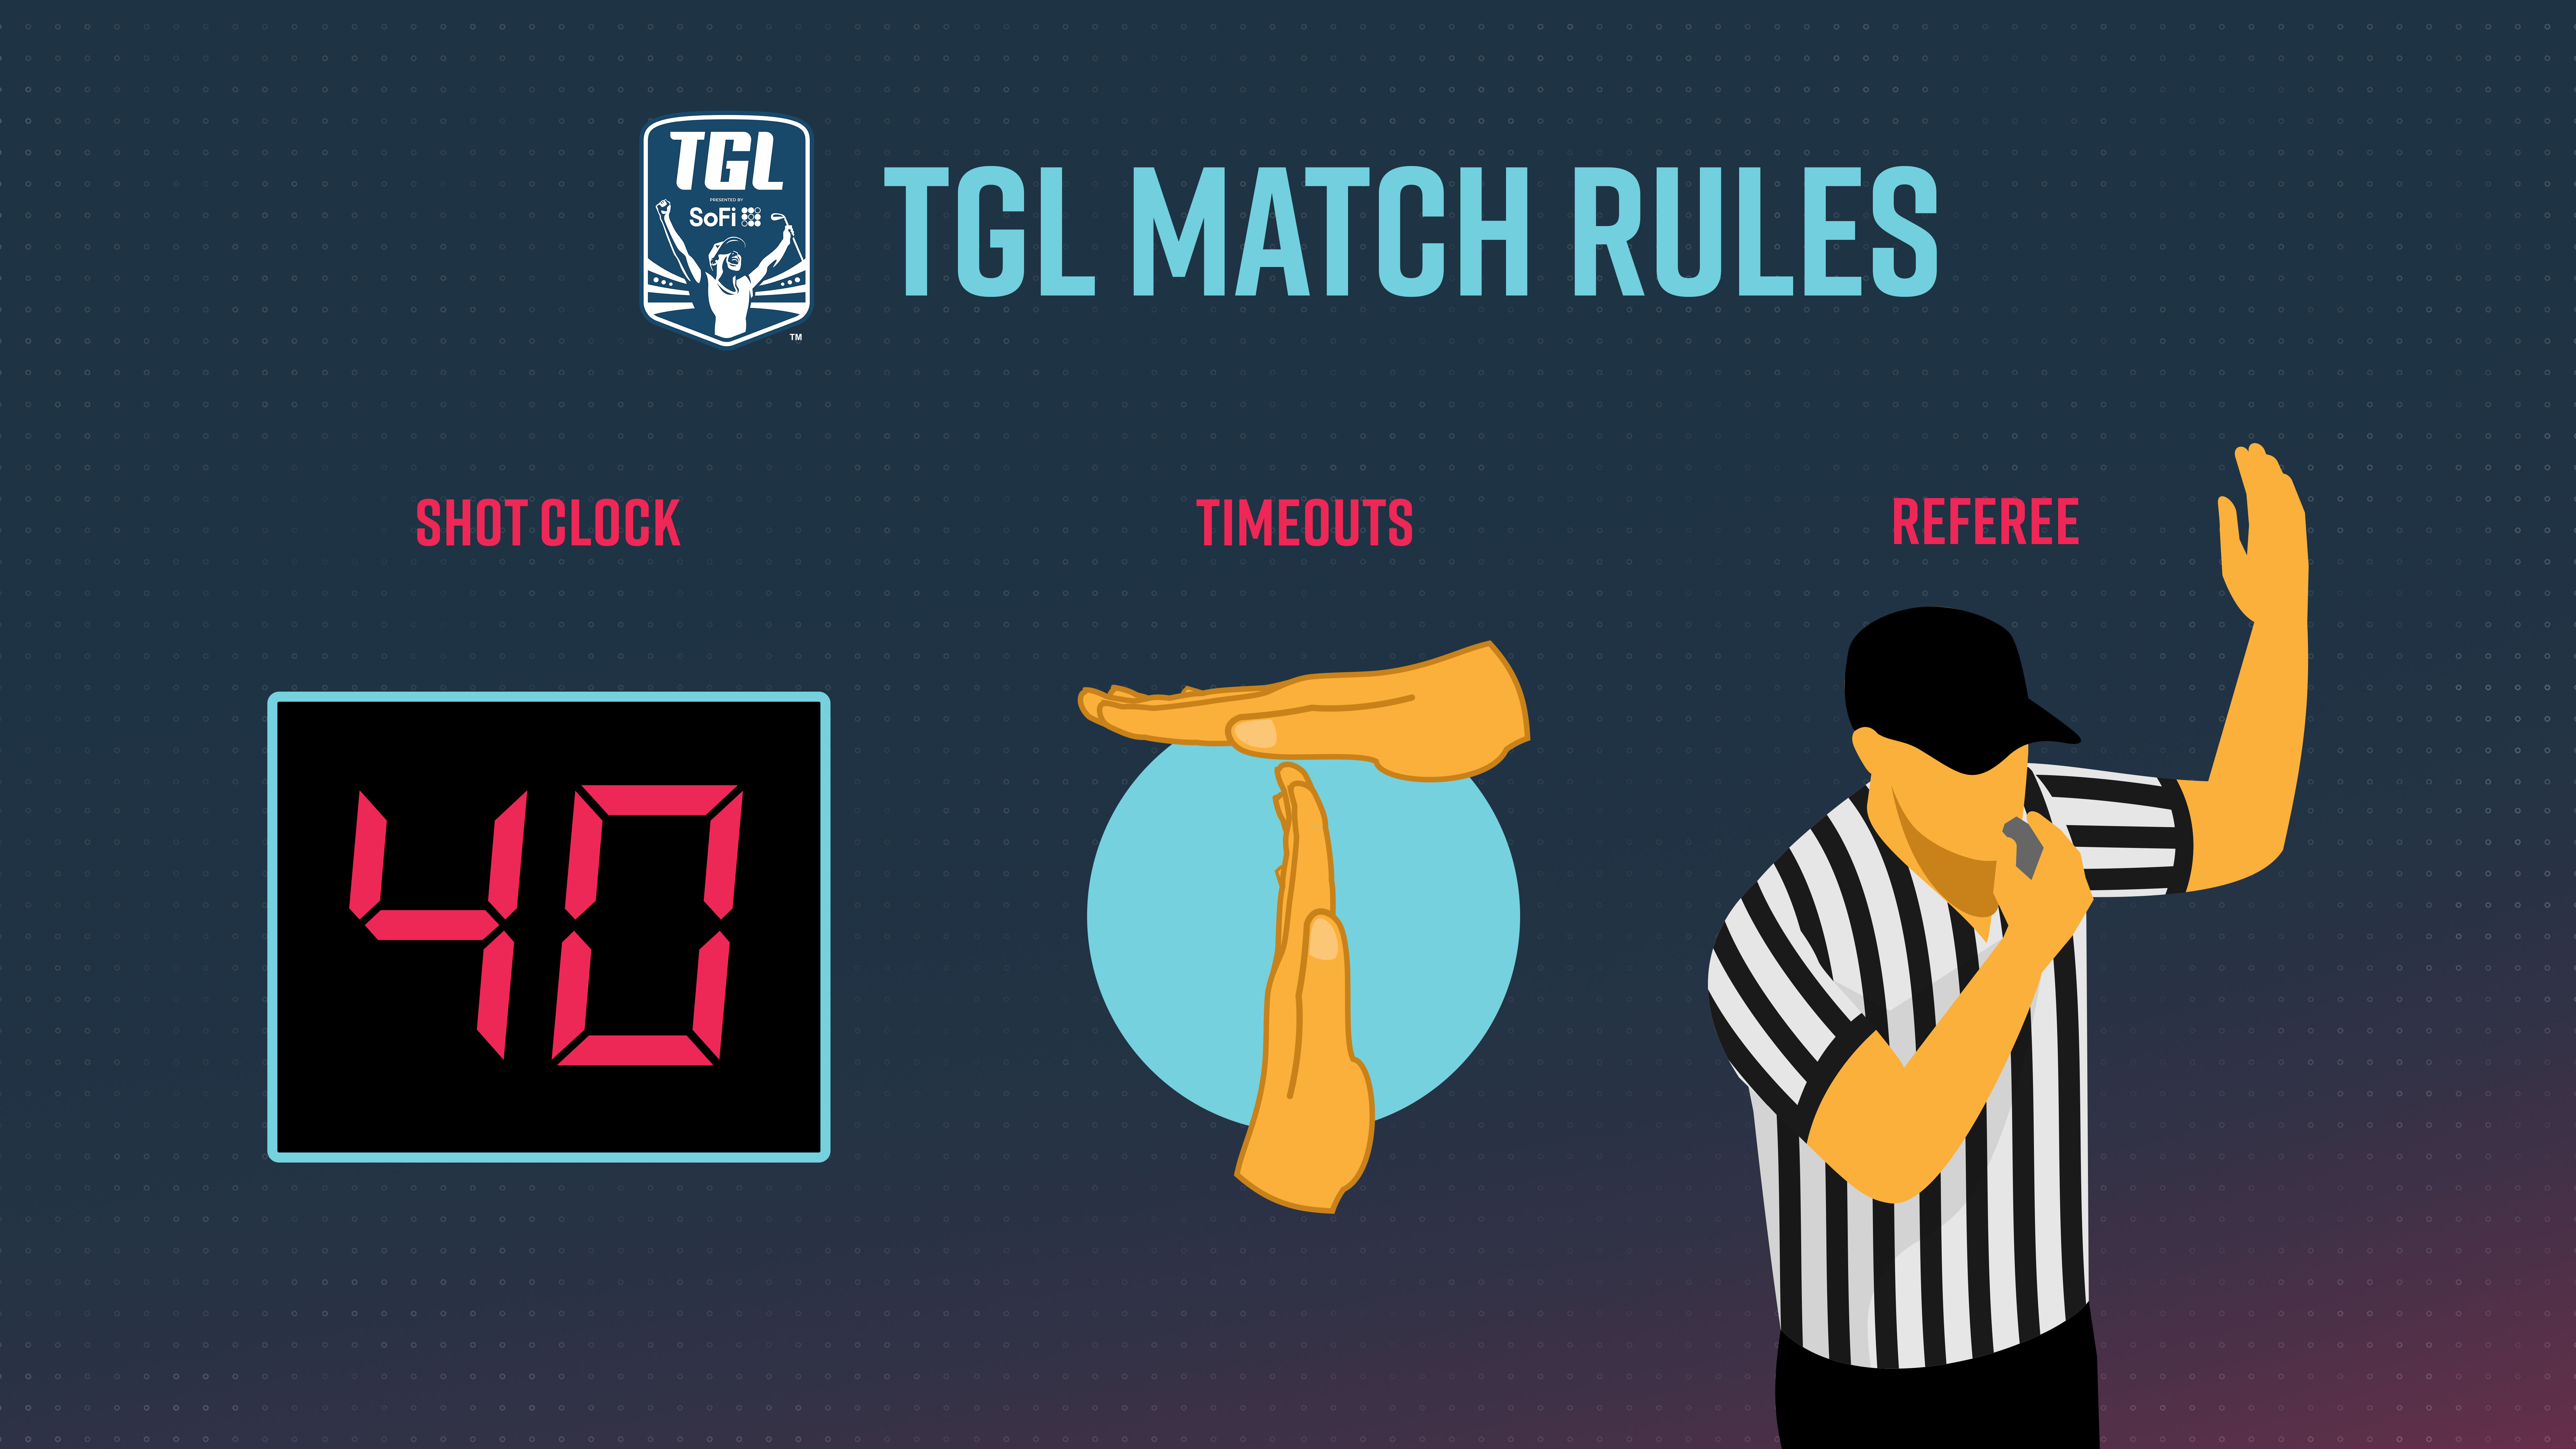 TGL Presented by SoFi to Include Shot Clock, Timeouts and a Referee